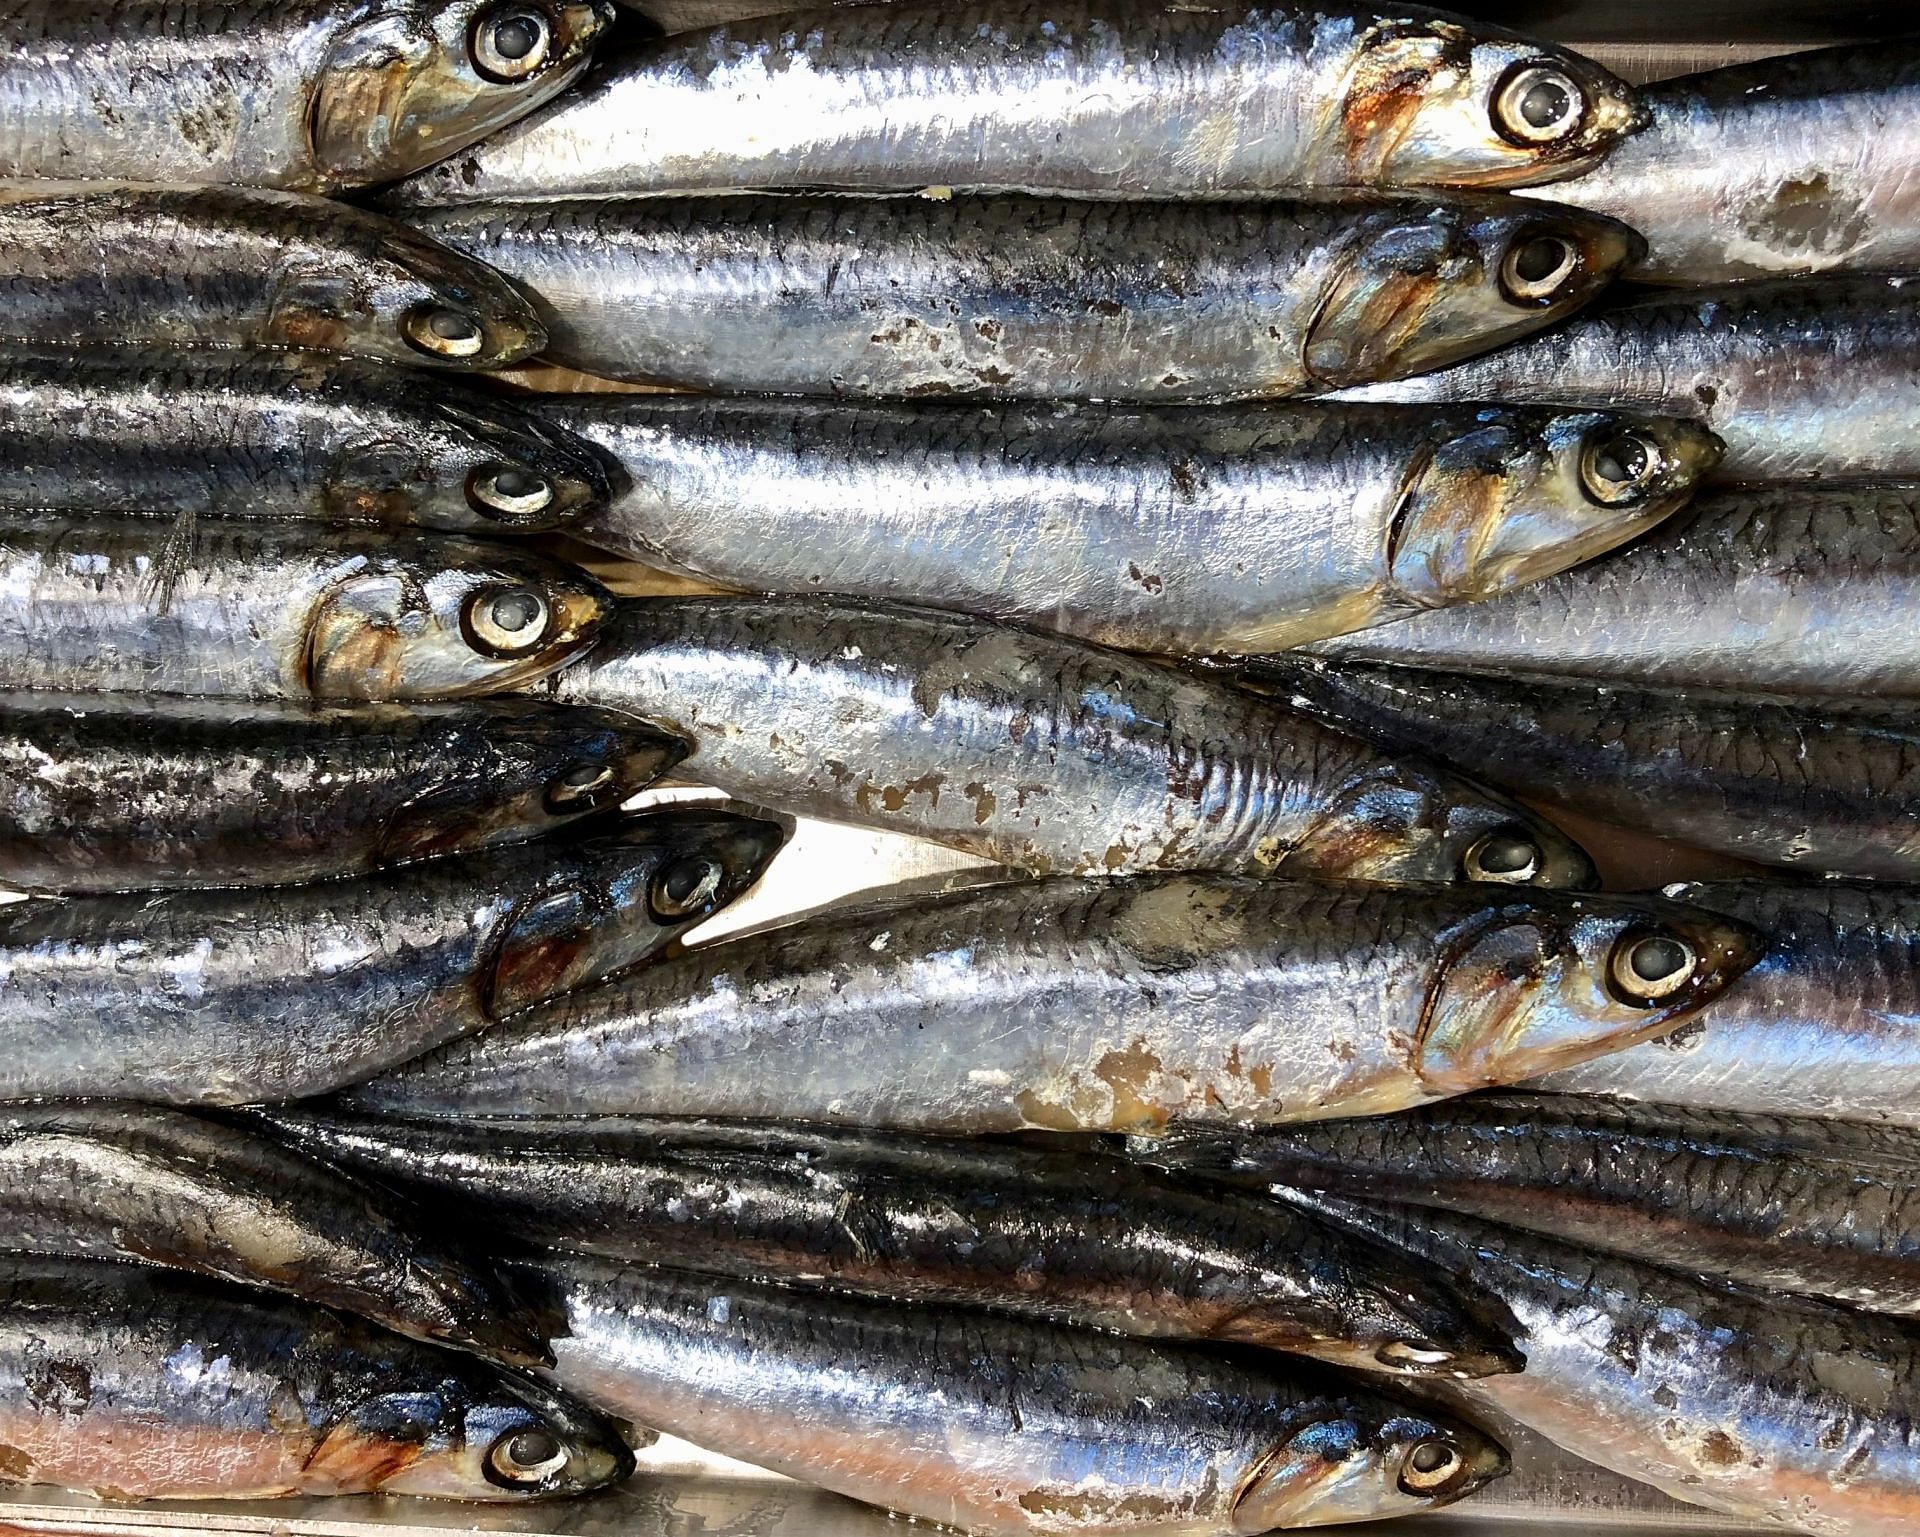 Anchovies are rich in omega-3 fatty acids. (Image via Unsplash/Diane Helentjaris)